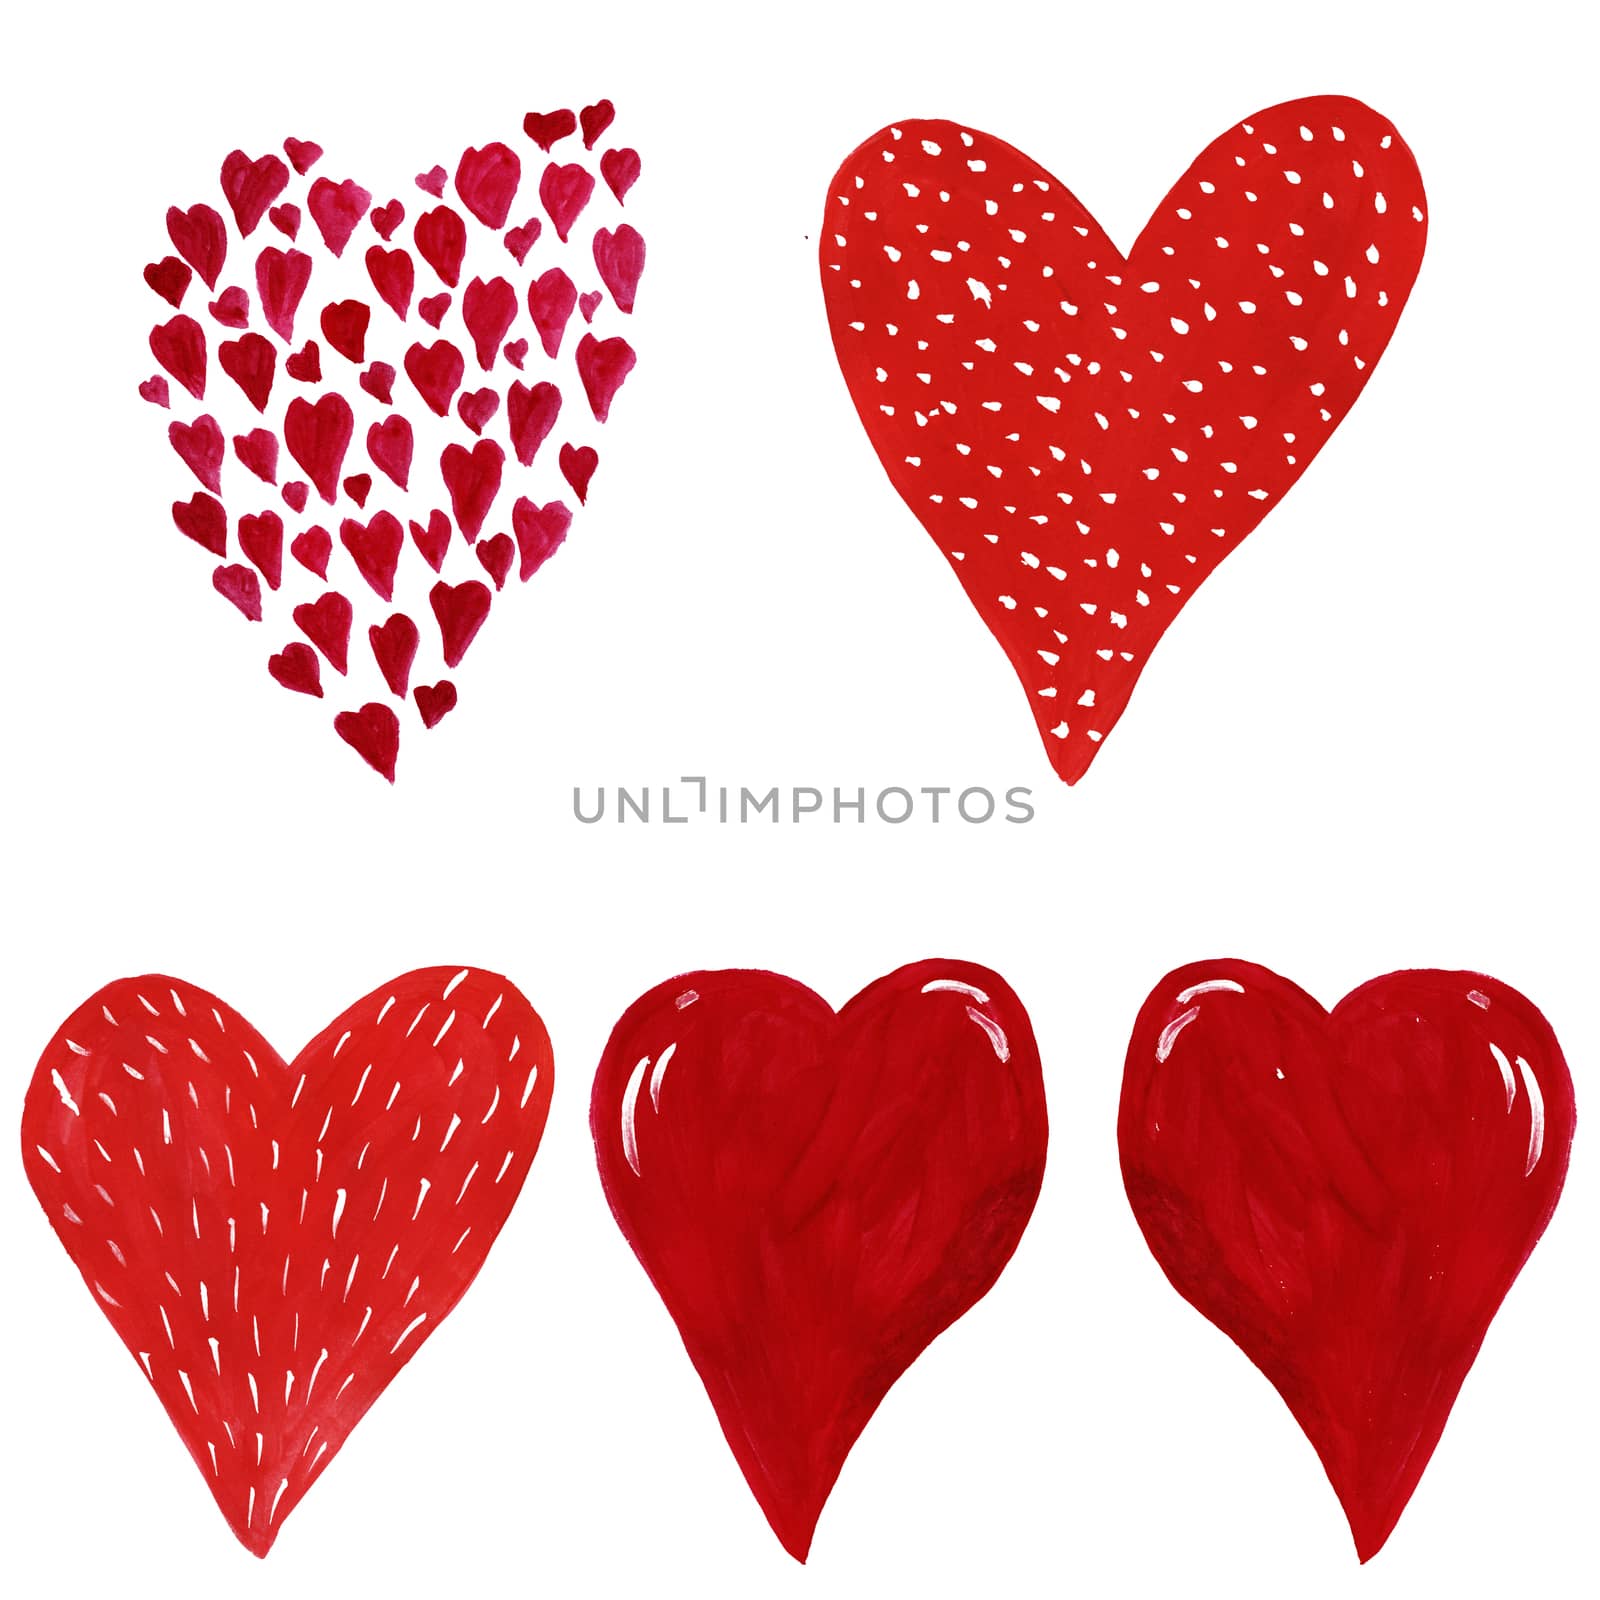 Hand drawn red hearts set isolated on white background. by Nata_Prando